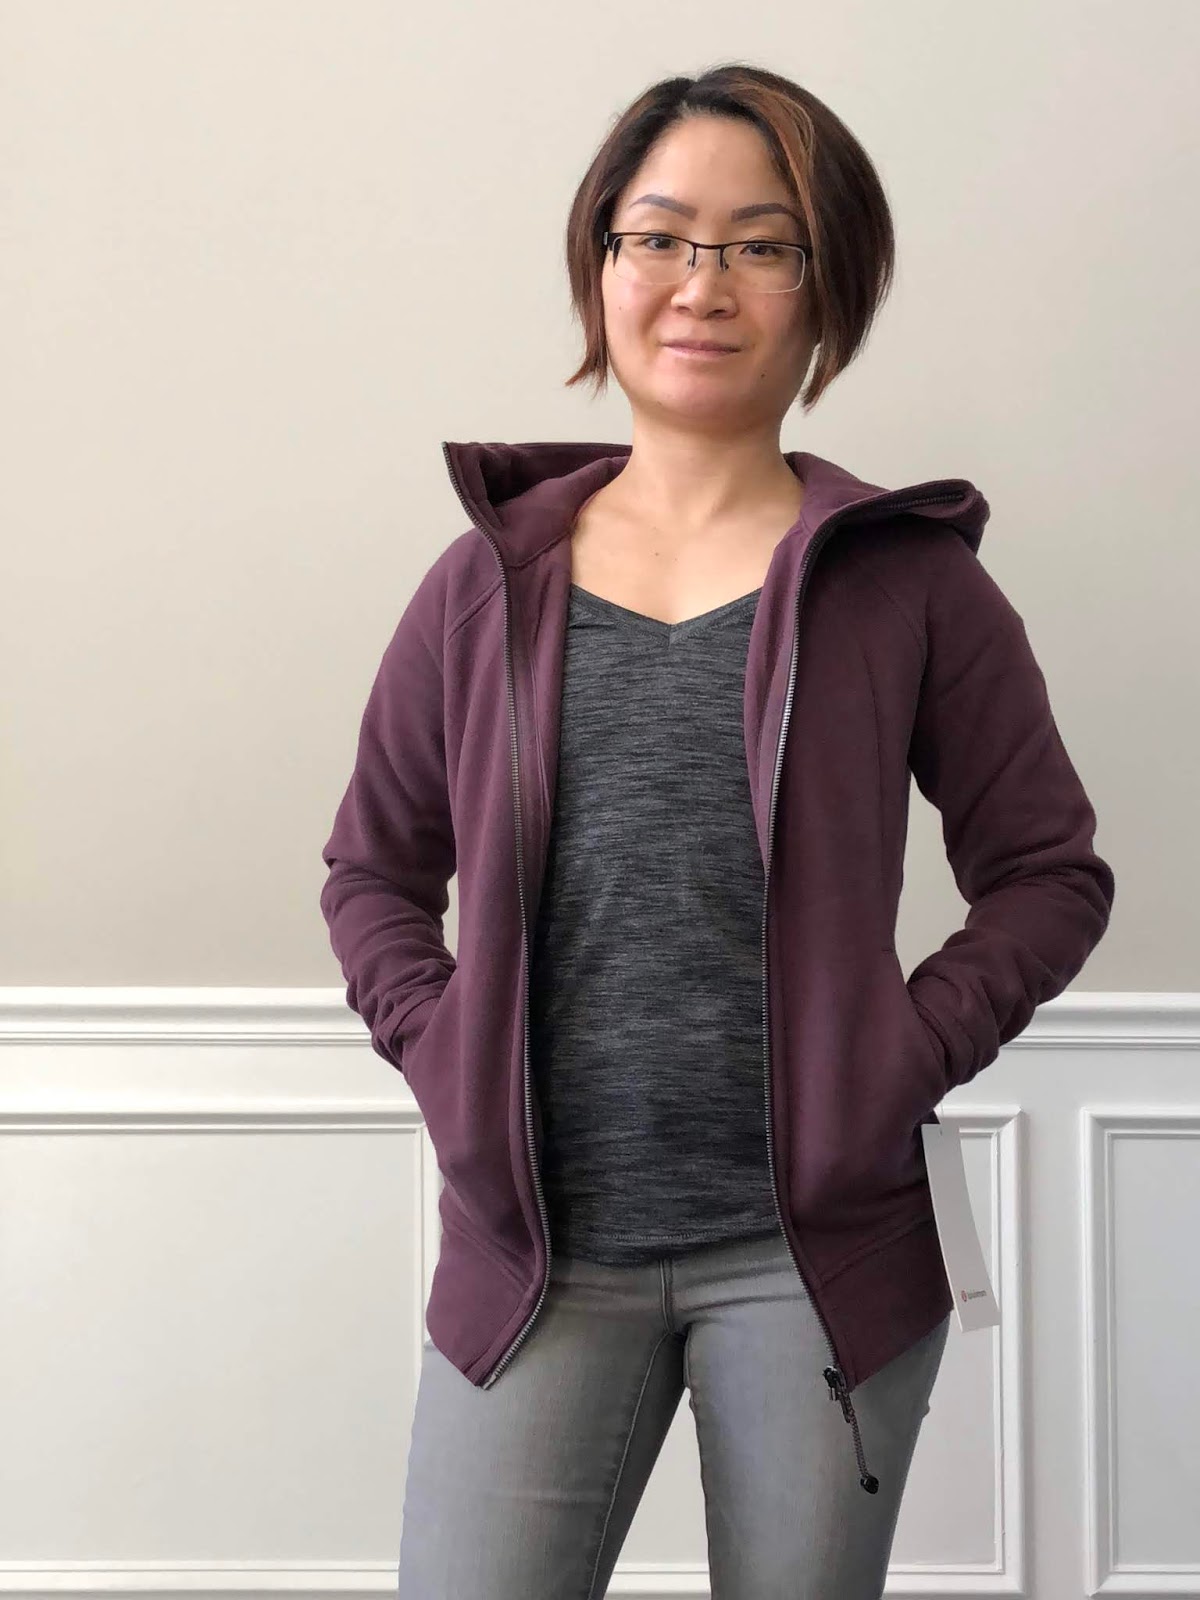 Fit Review Friday! Align Jogger Crop & Scuba Hoodie in Arctic Plum